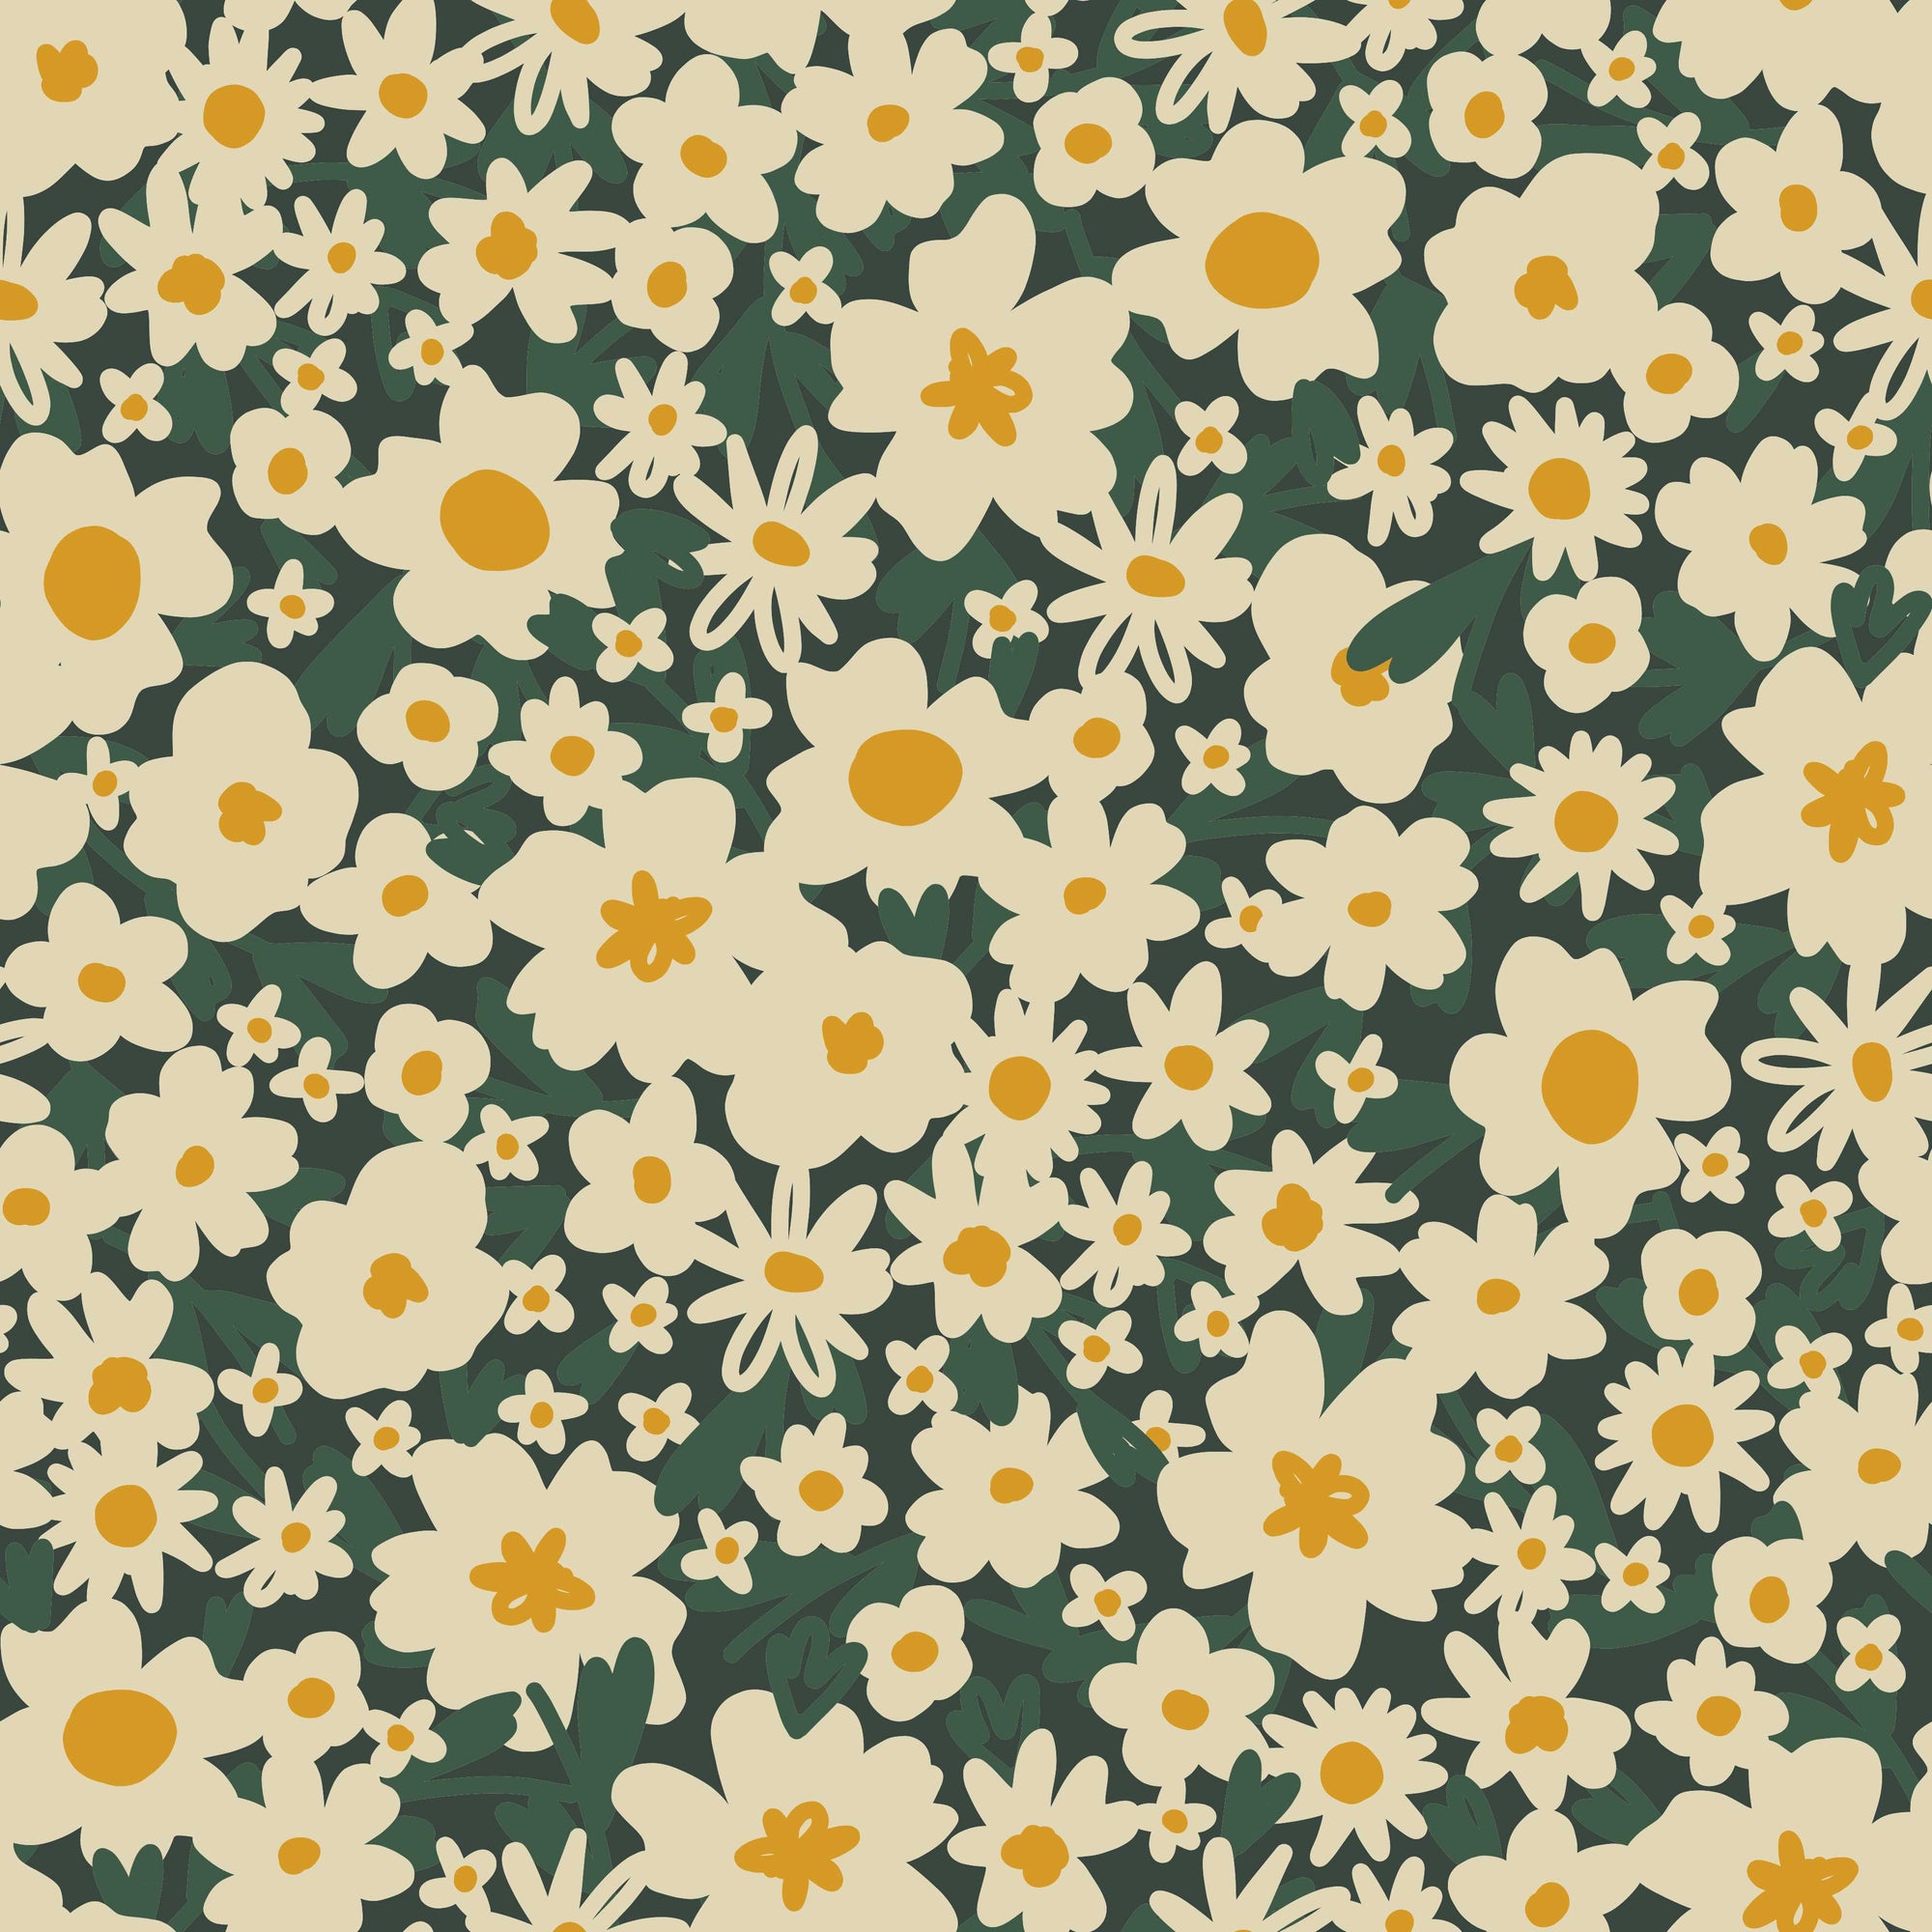 Botanical Summer Flowers Dissolvable Wrapping Paper